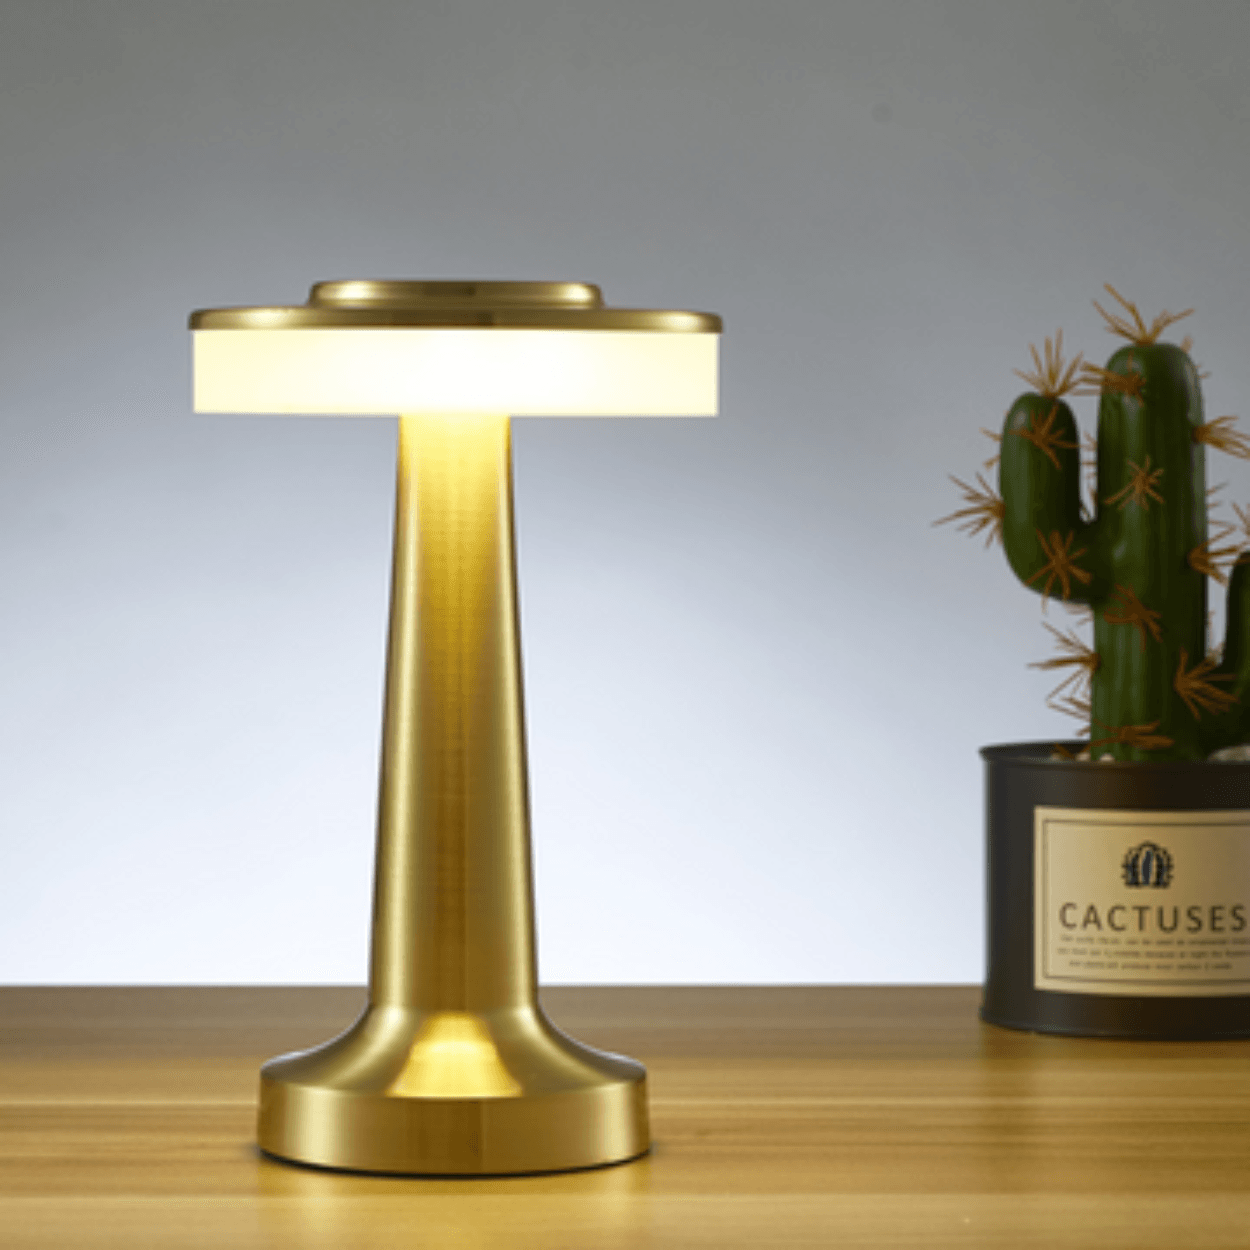 MUSHED RECHARGABLE TOUCH CONTROL WIRELESS BAR TABLE LAMP - Ankur Lighting